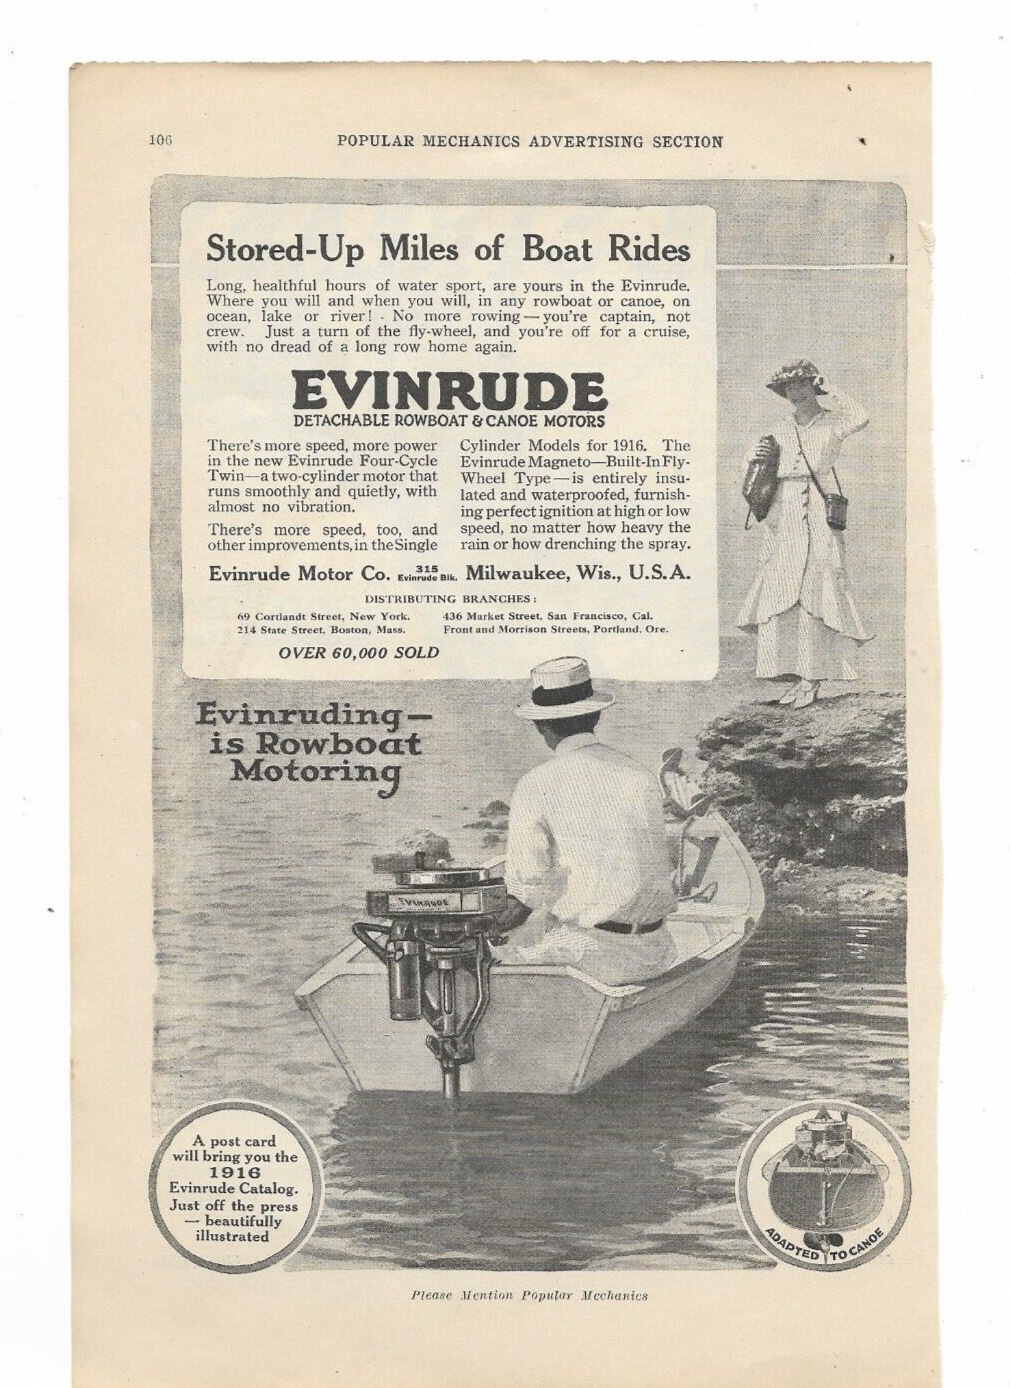 EVINRUDE MOTOR CO. BOAT MOTORBOAT WATER FOUR-CYCLE TWIN TWO CYLINDER ENGINE .3